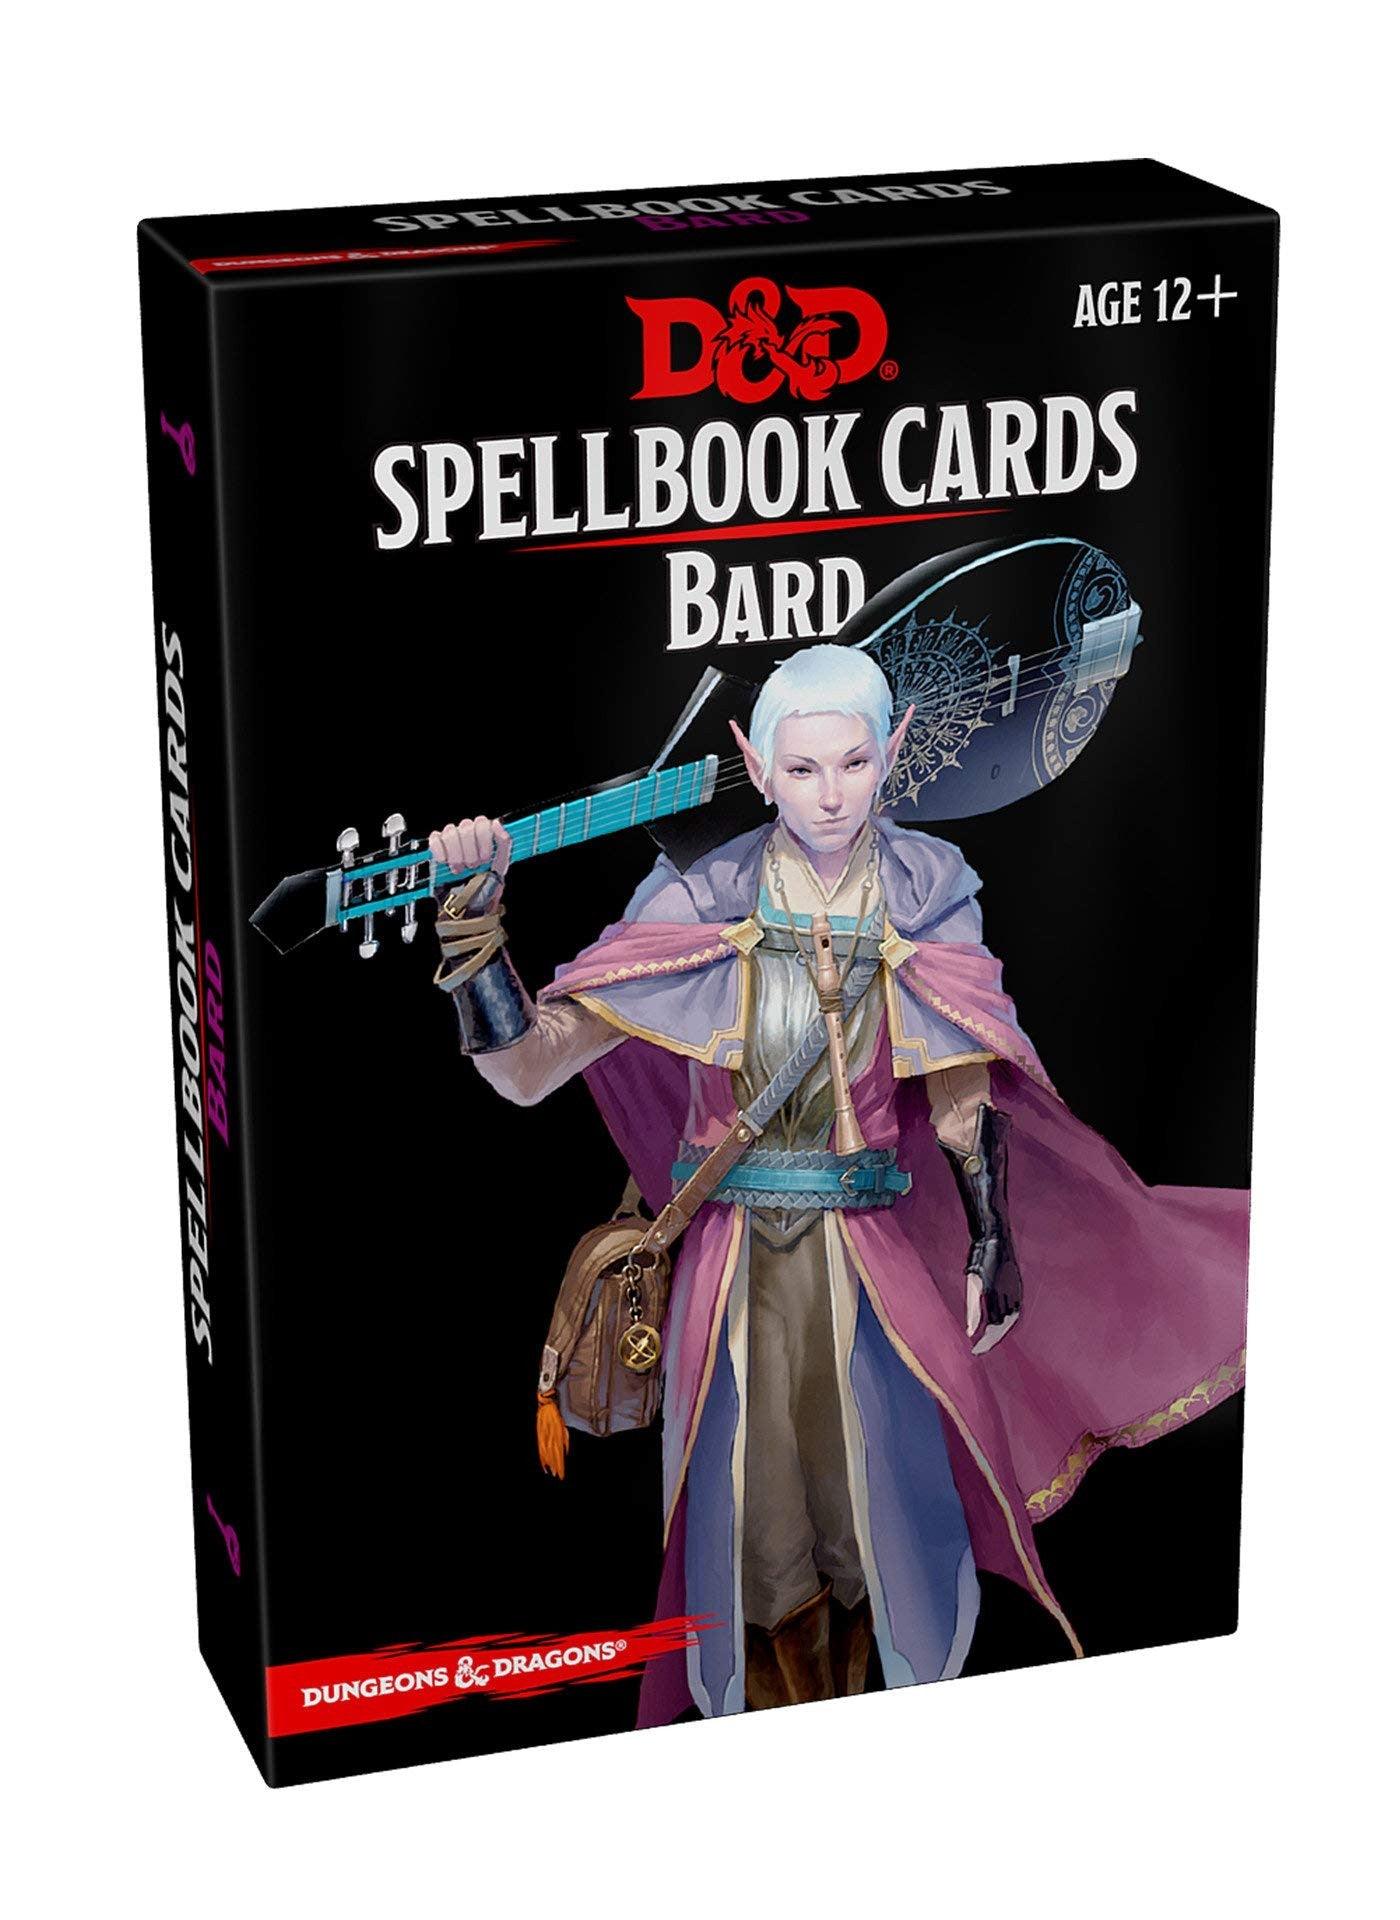 VR-101244 D&D Dungeons & Dragons Spellbook Cards Bard - Wizards of the Coast - Titan Pop Culture